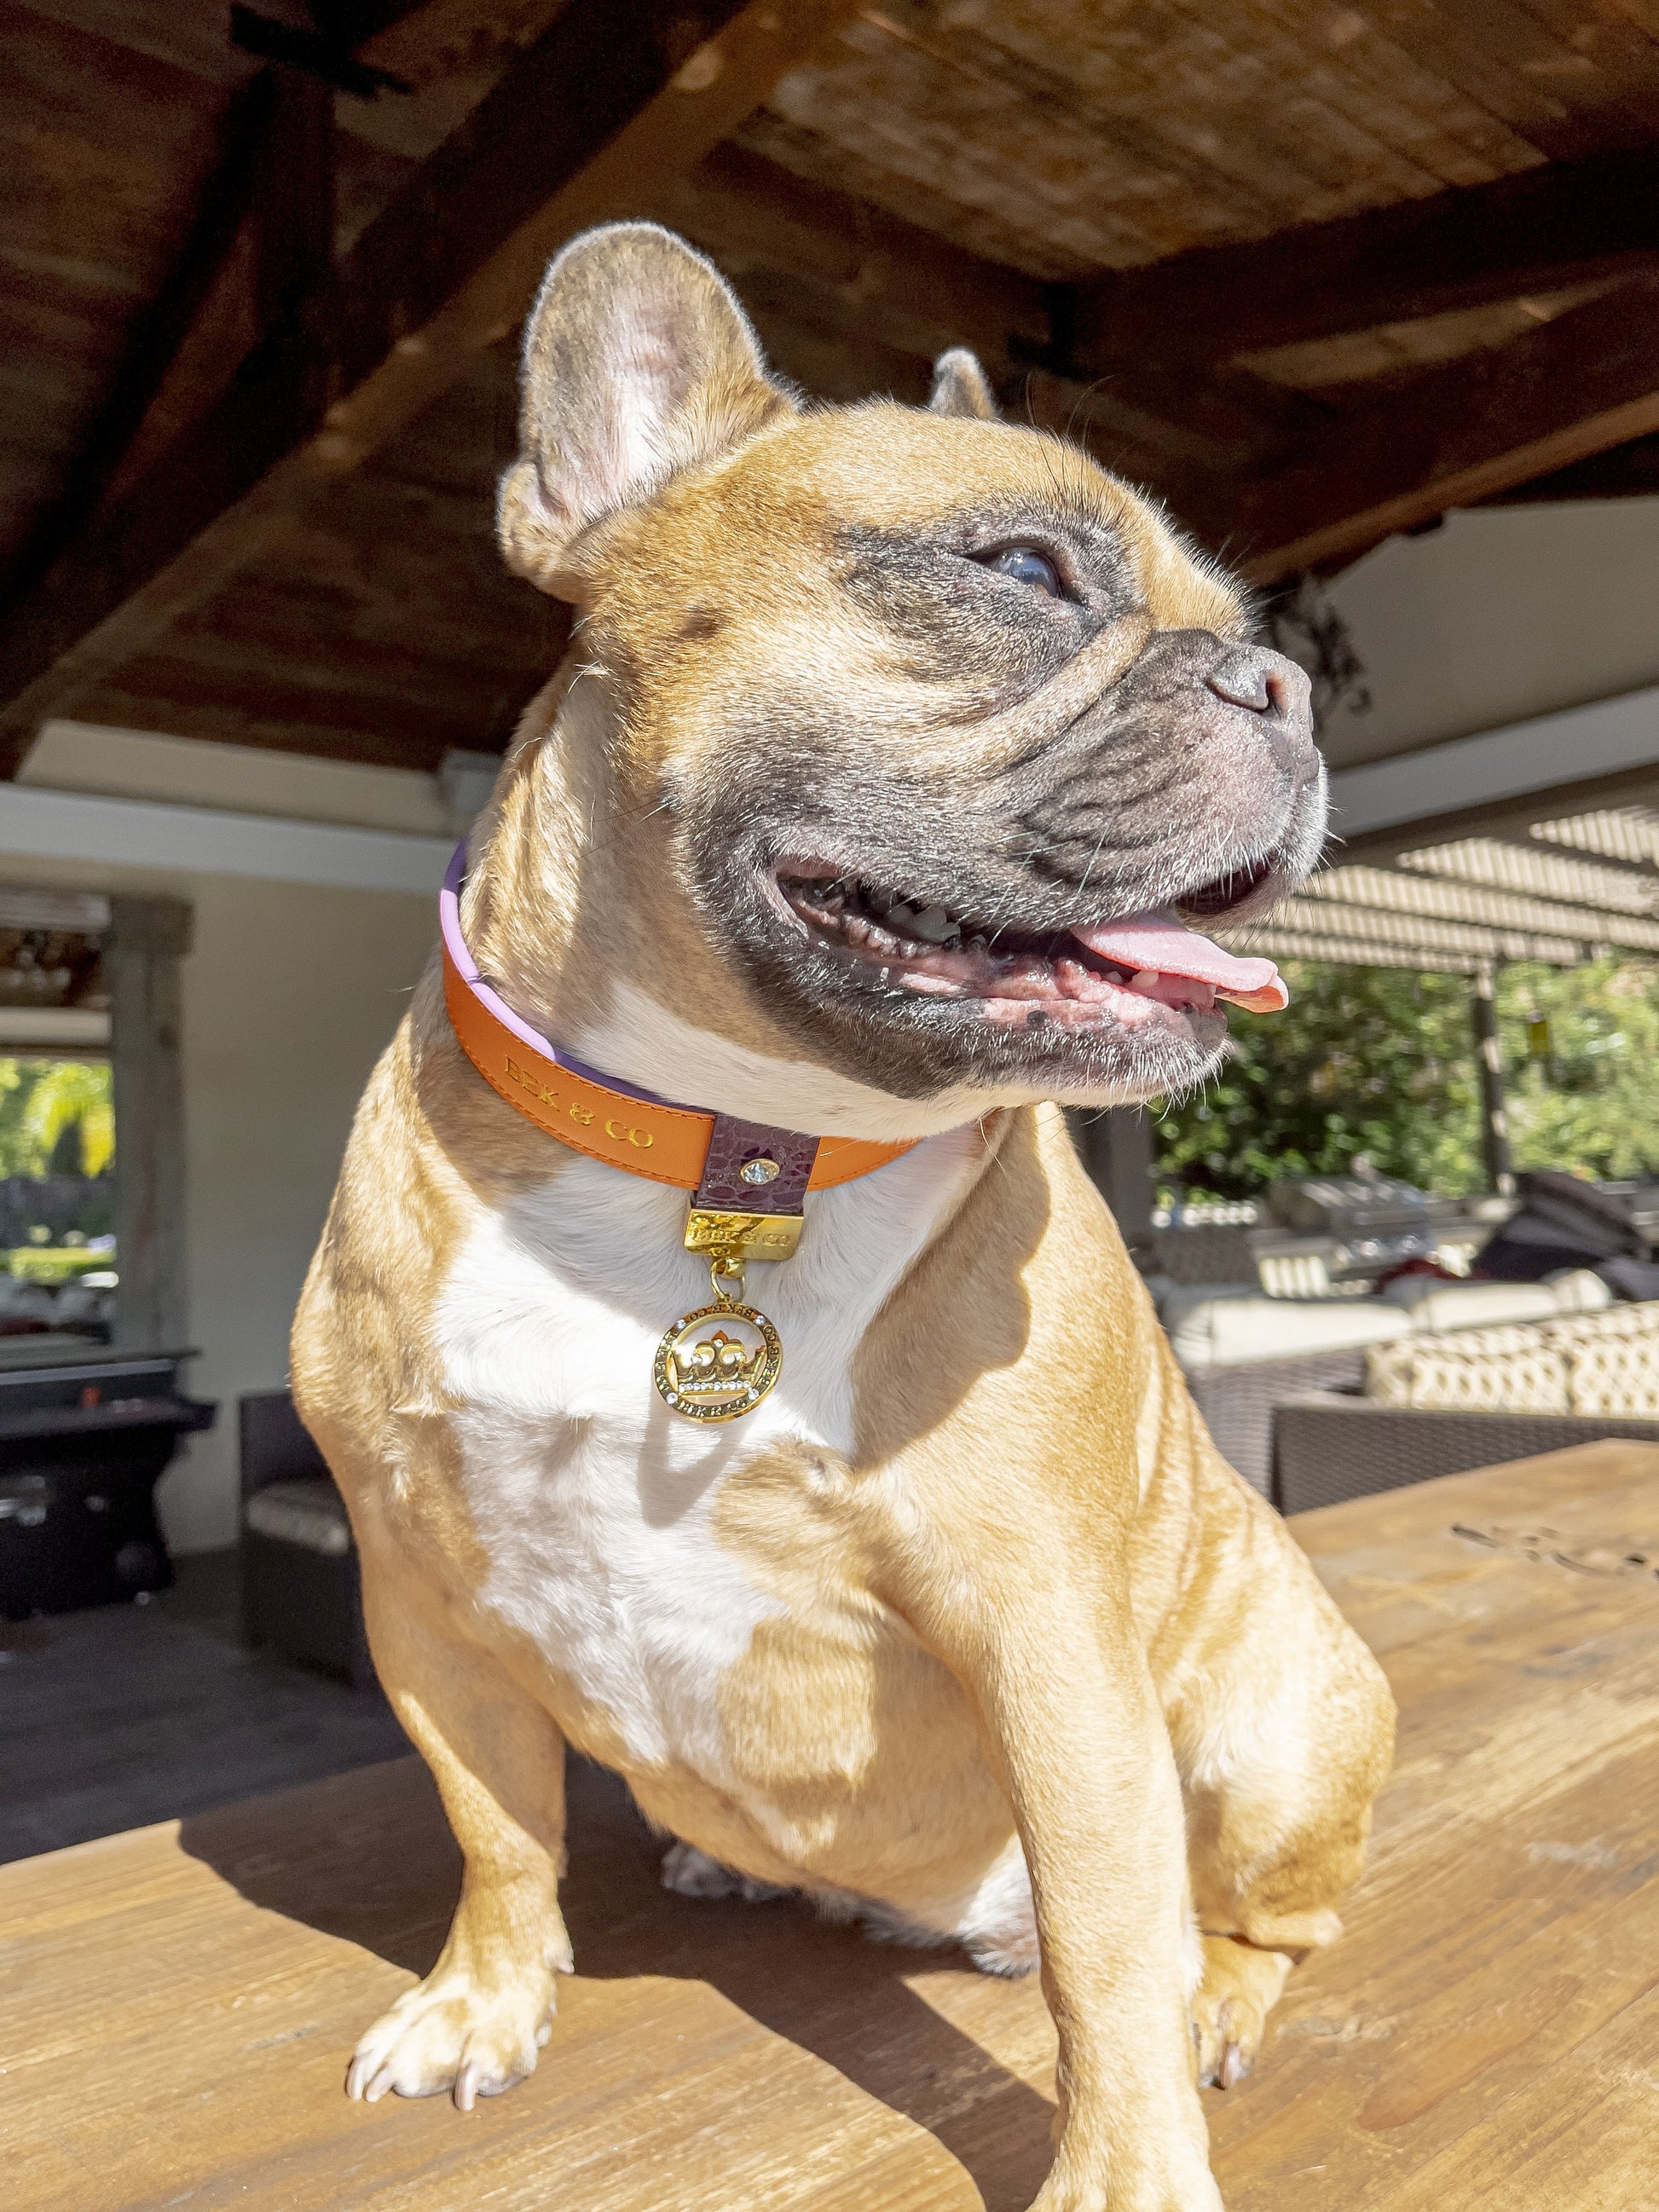 Handsome French Bulldog showing off his Bek & Co Regal Orange Leather Frenchie collar sitting on outdoor wooden table